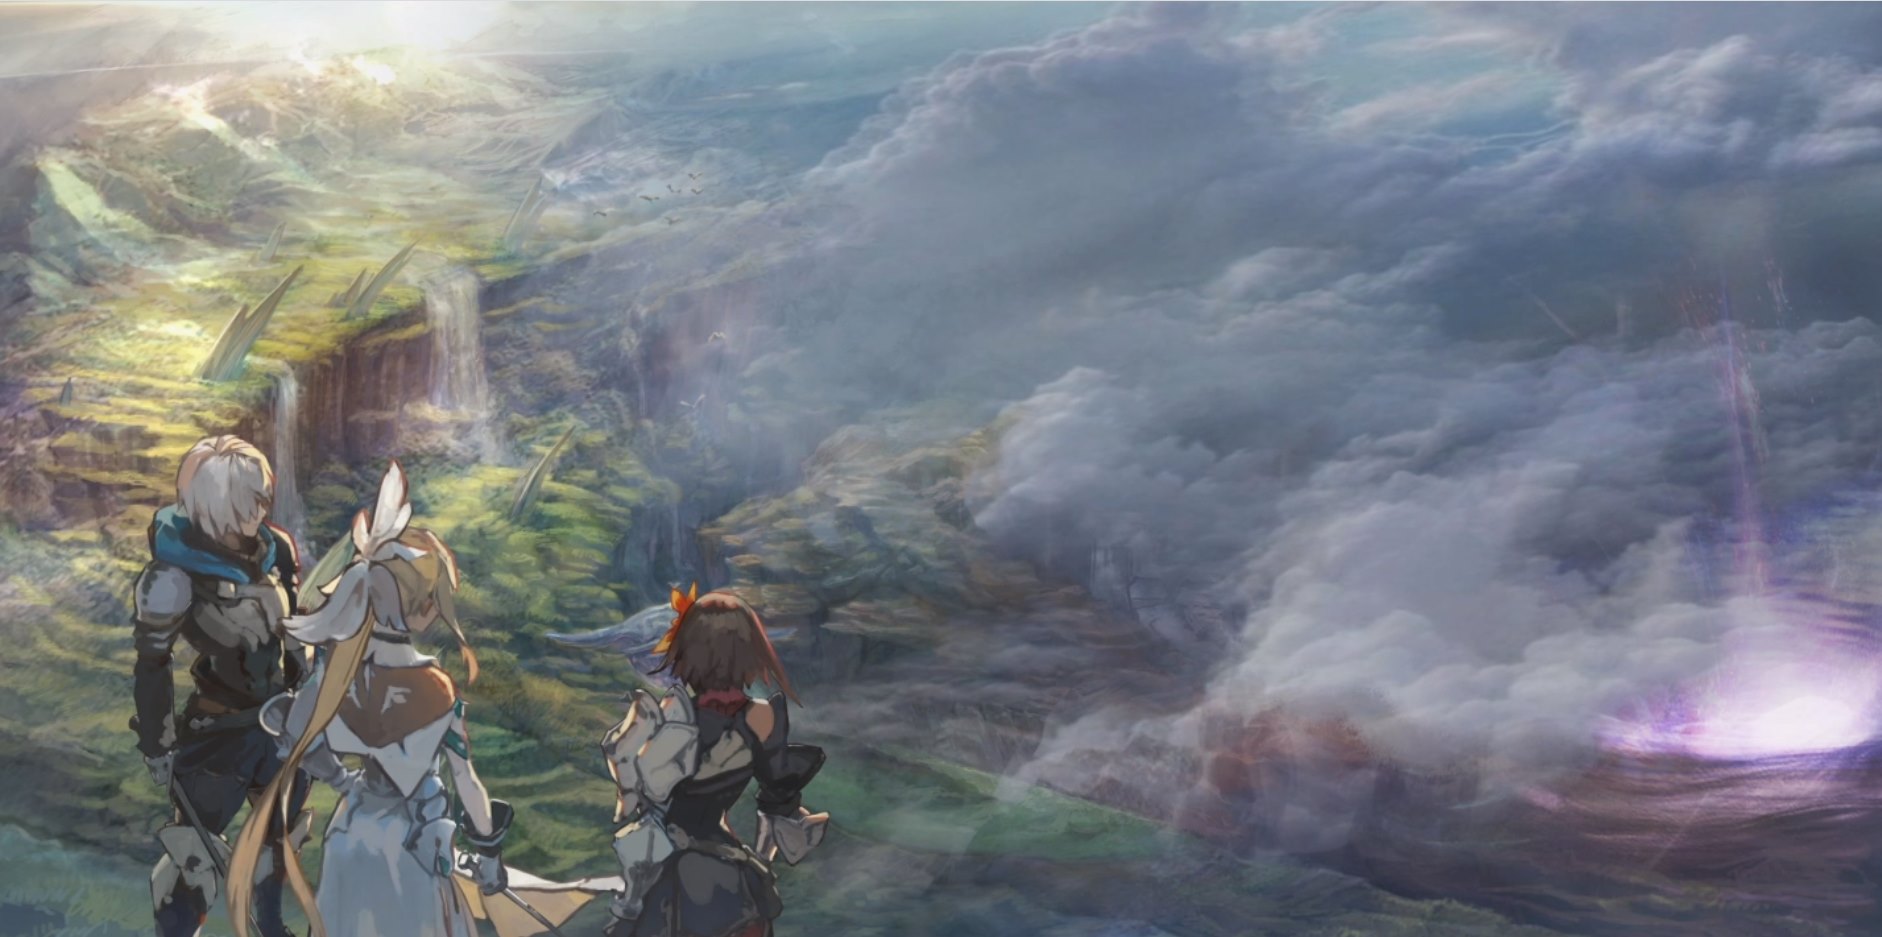 Newly teased game from Sega aims to capture the non-linear, player-driven experience of TRPGs